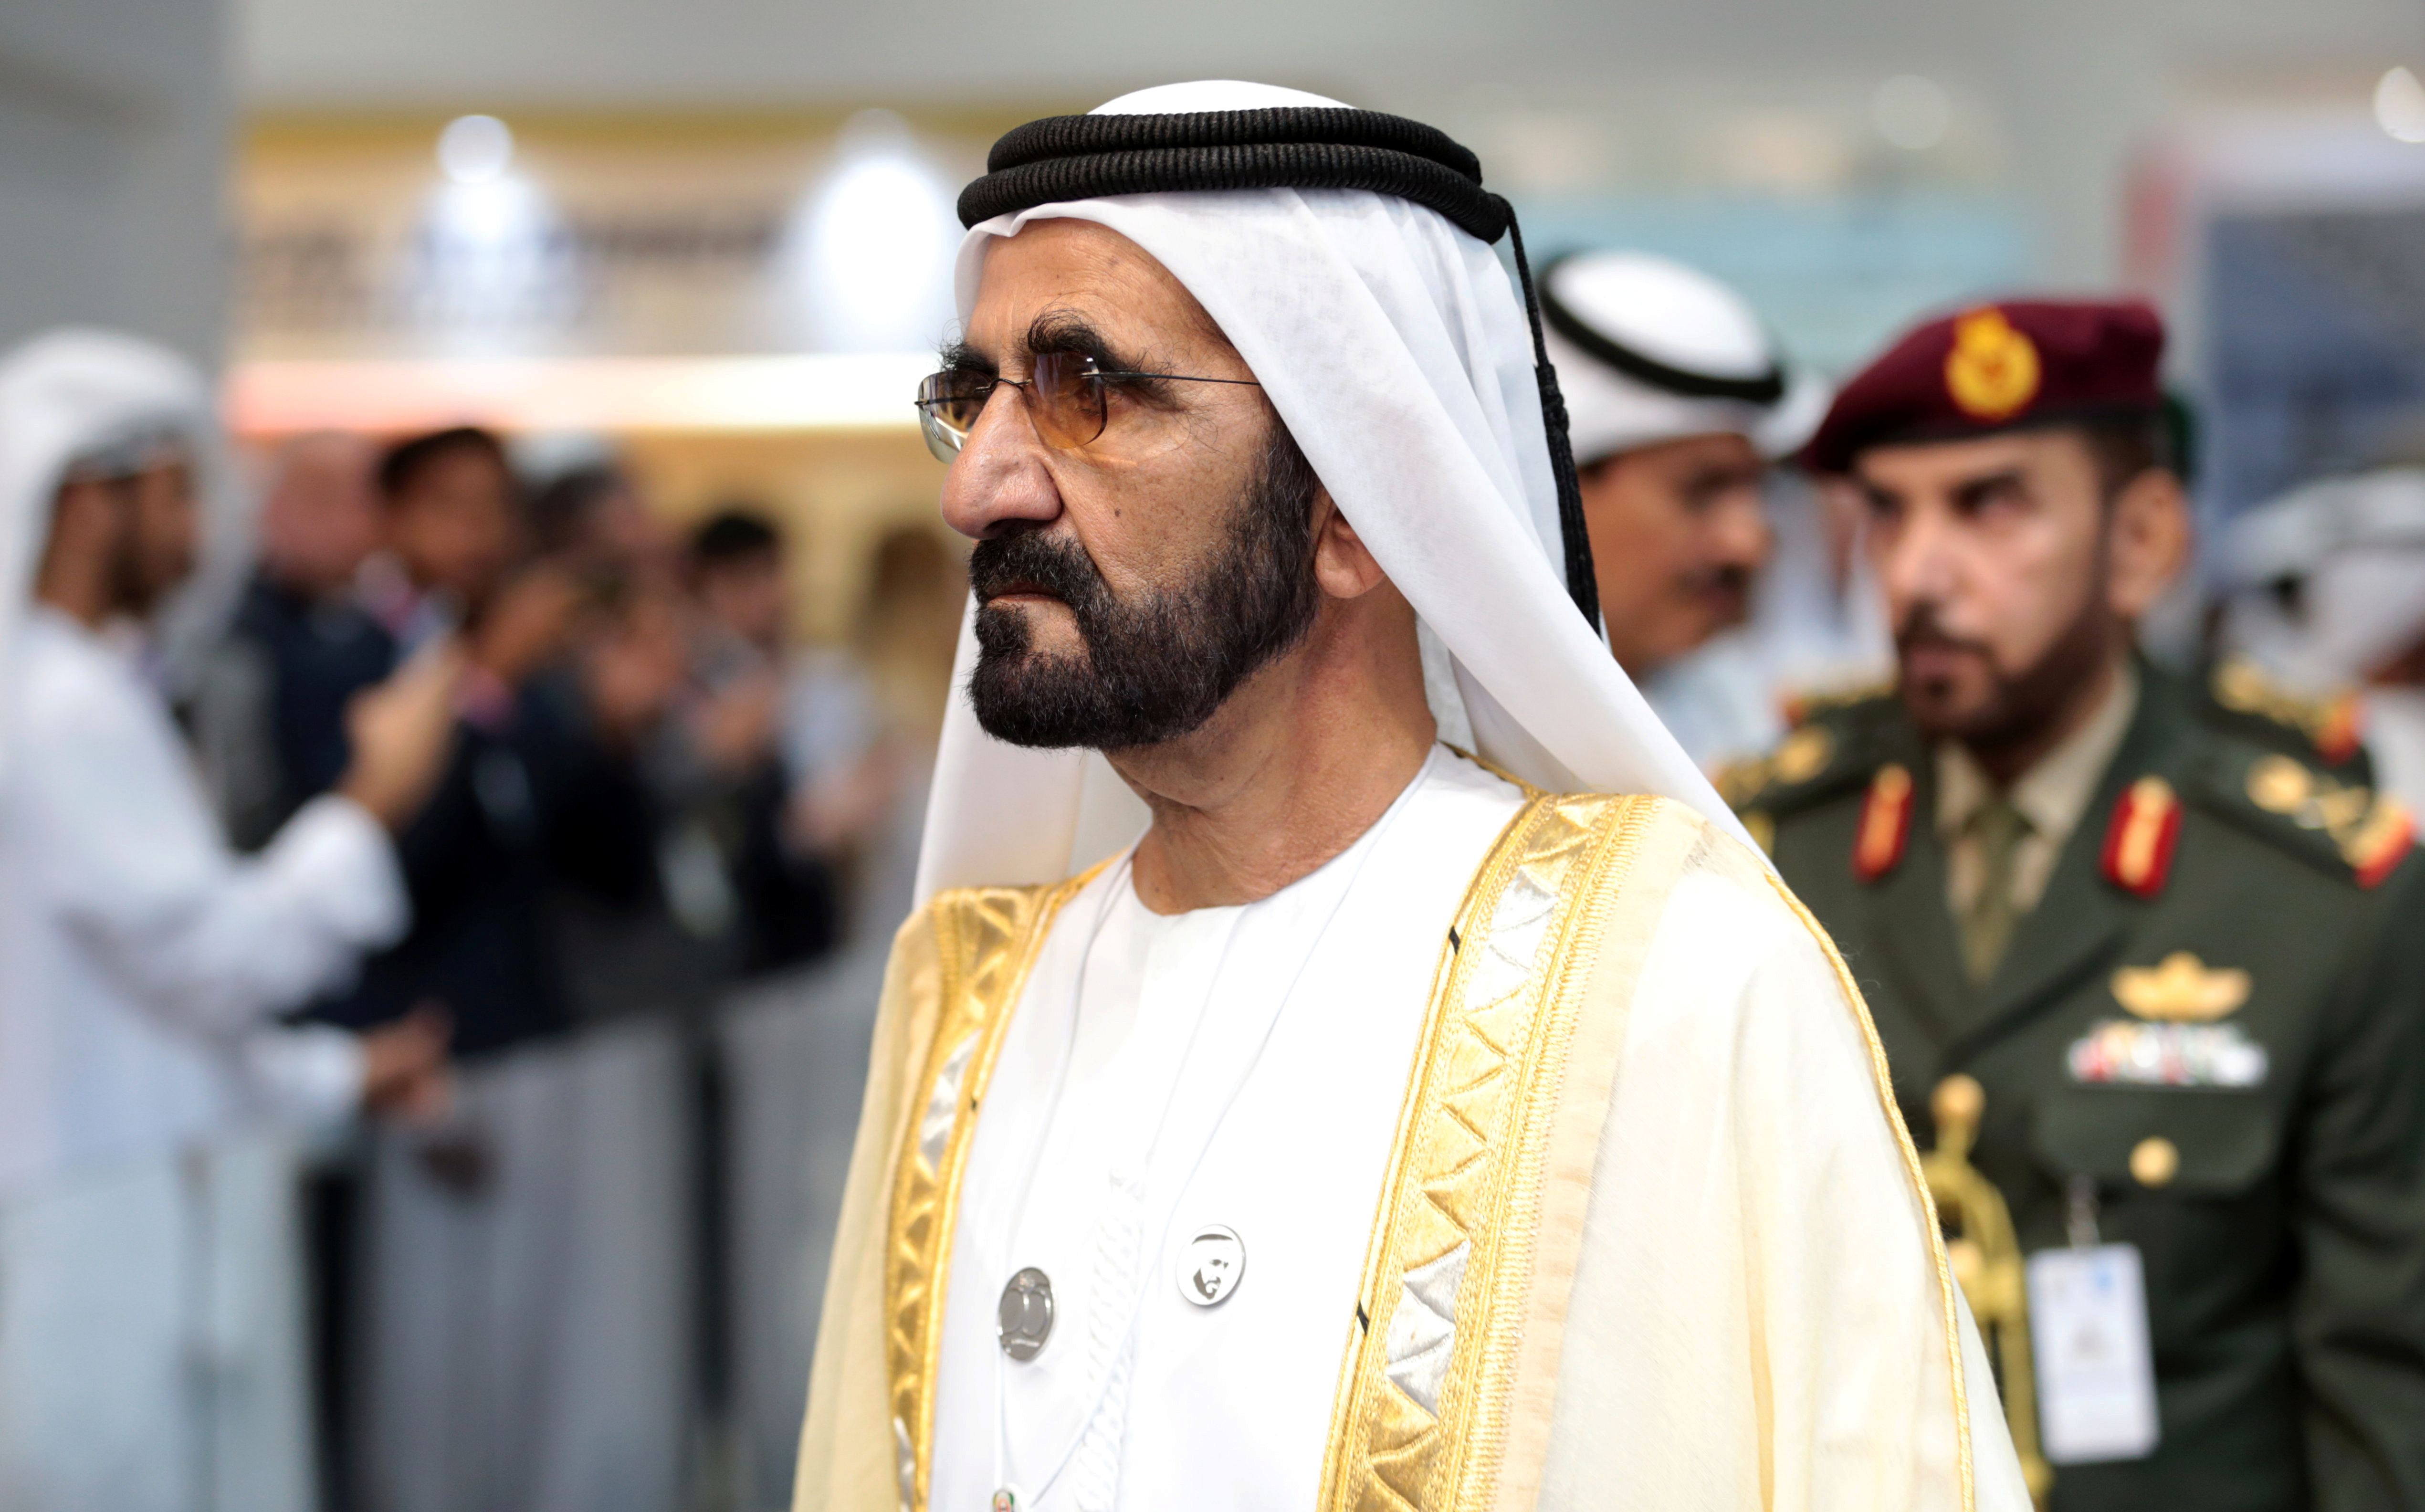 Dubai's Ruler Sheikh Mohammed bin Rashid al-Maktoum, Prime Minister and Vice-President of the United Arab Emirates attends the International Defence Exhibition & Conference (IDEX) in Abu Dhabi, United Arab Emirates February 17, 2019. REUTERS/Christopher Pike